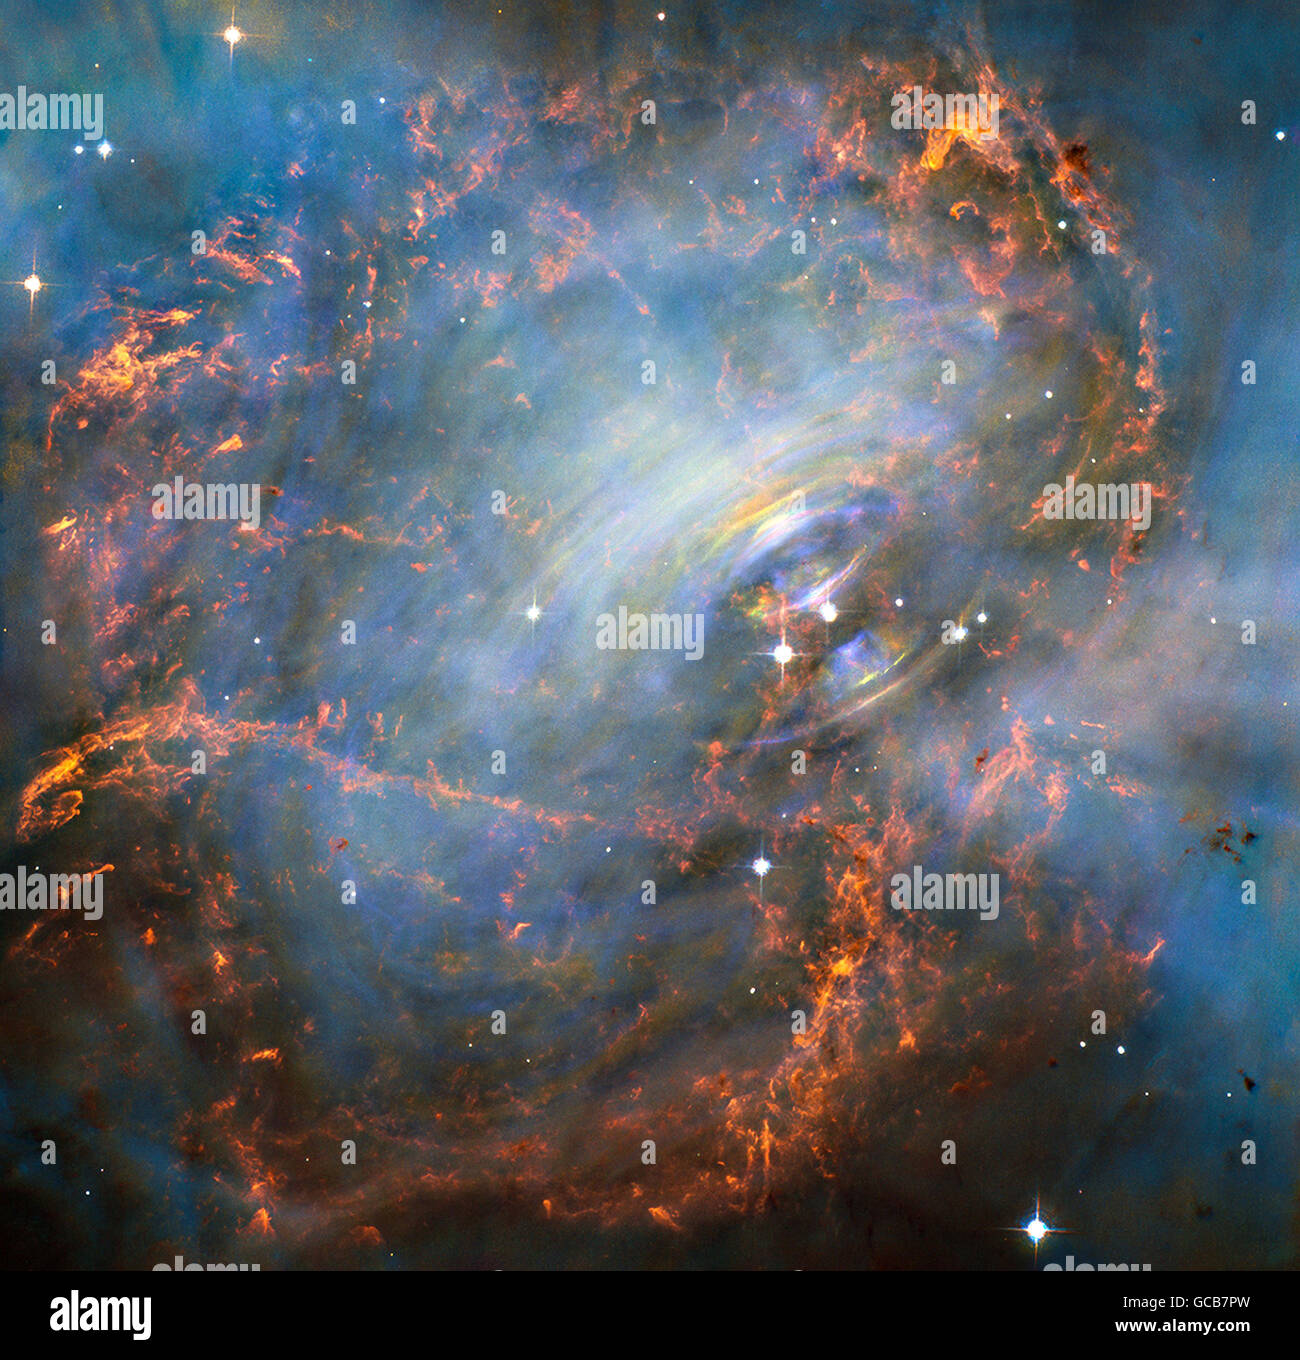 NASA's Hubble Space Telescope view deep into the core of the Crab Nebula, this close-up image reveals the beating heart of one of the most historic and intensively studied remnants of a supernova, an exploding star. The inner region sends out clock-like pulses of radiation and tsunamis of charged particles embedded in magnetic fields. The neutron star at the very center of the Crab Nebula has about the same mass as the sun but compressed into an incredibly dense sphere that is only a few miles across. Spinning 30 times a second, the neutron star shoots out detectable beams of energy that make Stock Photo